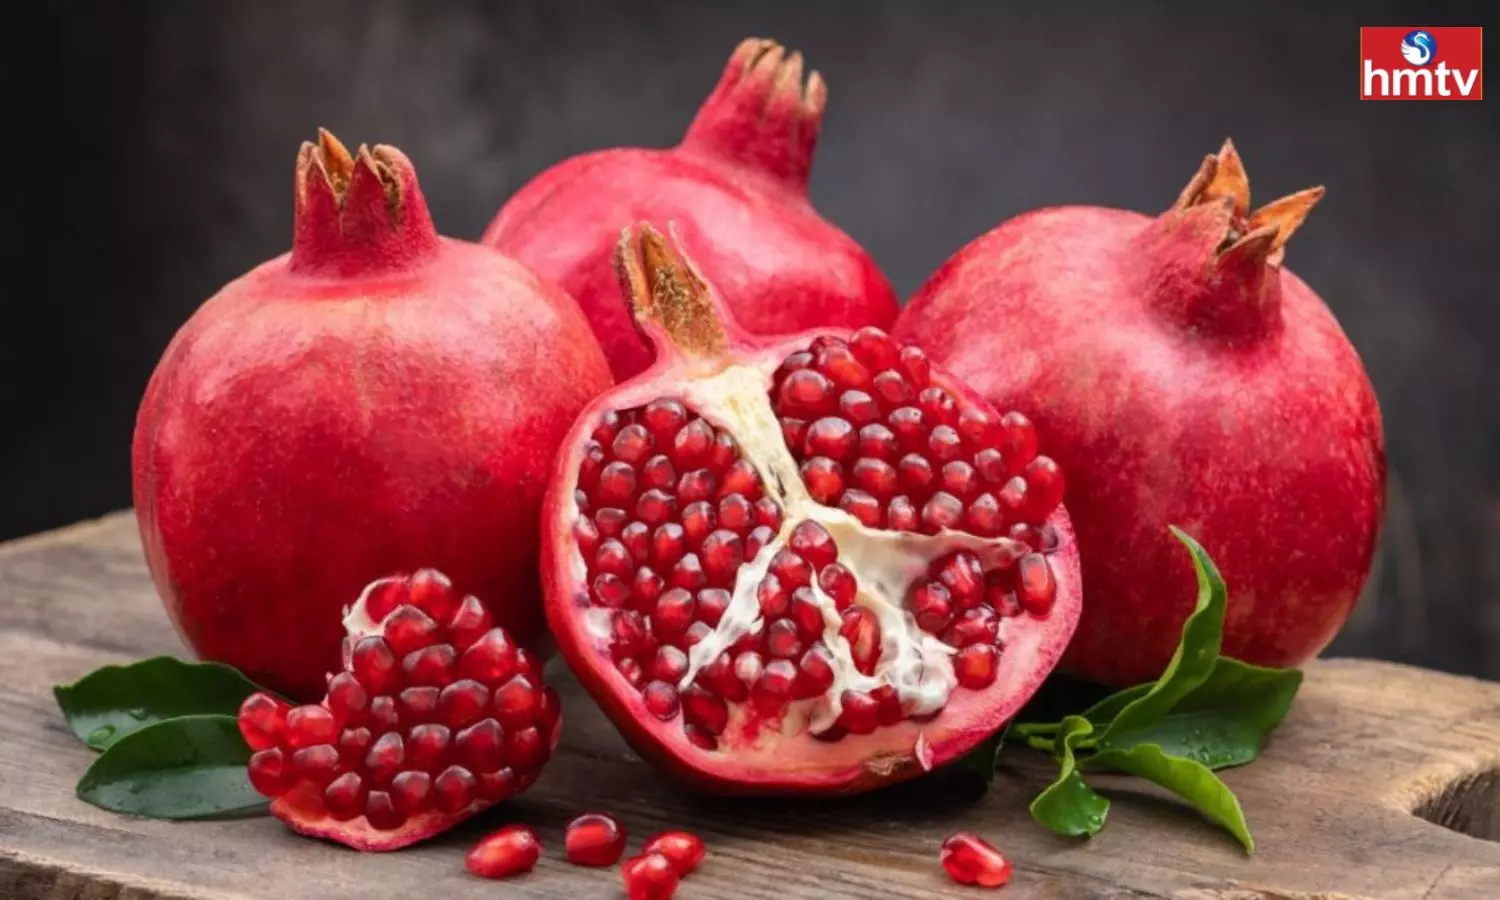 Pomegranate keeps the skin healthy and soft use it like this